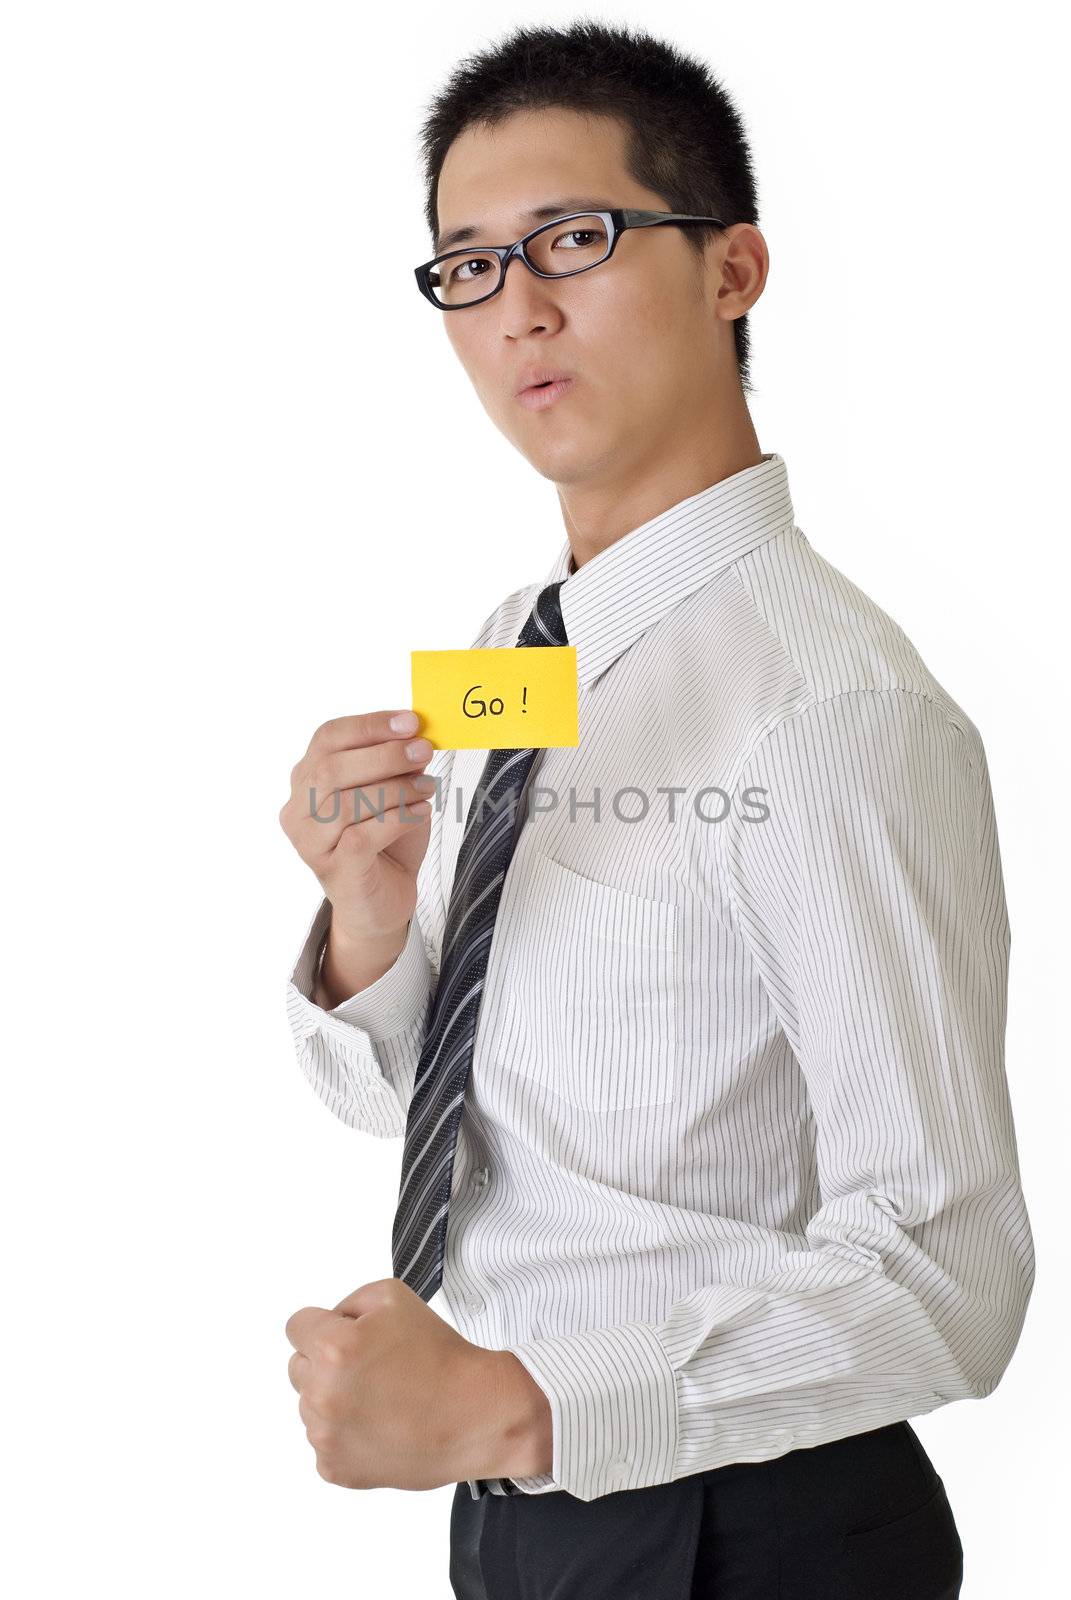 Business man say go and holding yellow card, closeup portrait of Asian on white background.